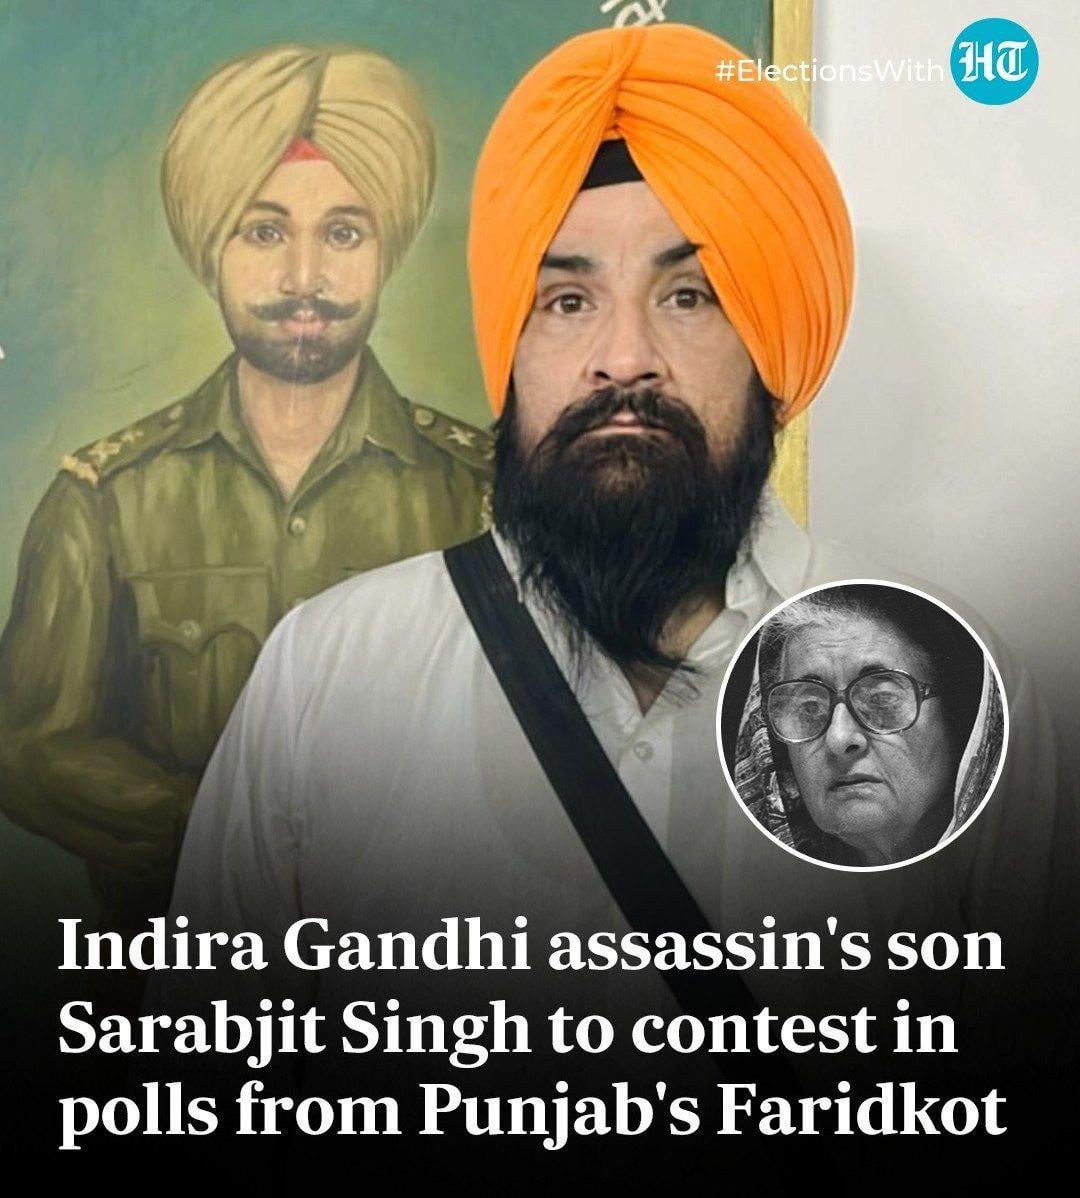 Sarabjit Singh, Son of Former PM Indira Gandhi's Assass!n, Beant Singh to Contest Lok Sabha Elections from Punjab's Faridkot. Traitors like Beant Singh choose religion over country. Beant Singh who had sworn to protect the PM betrayed and k!lled the Prime Minister of India.